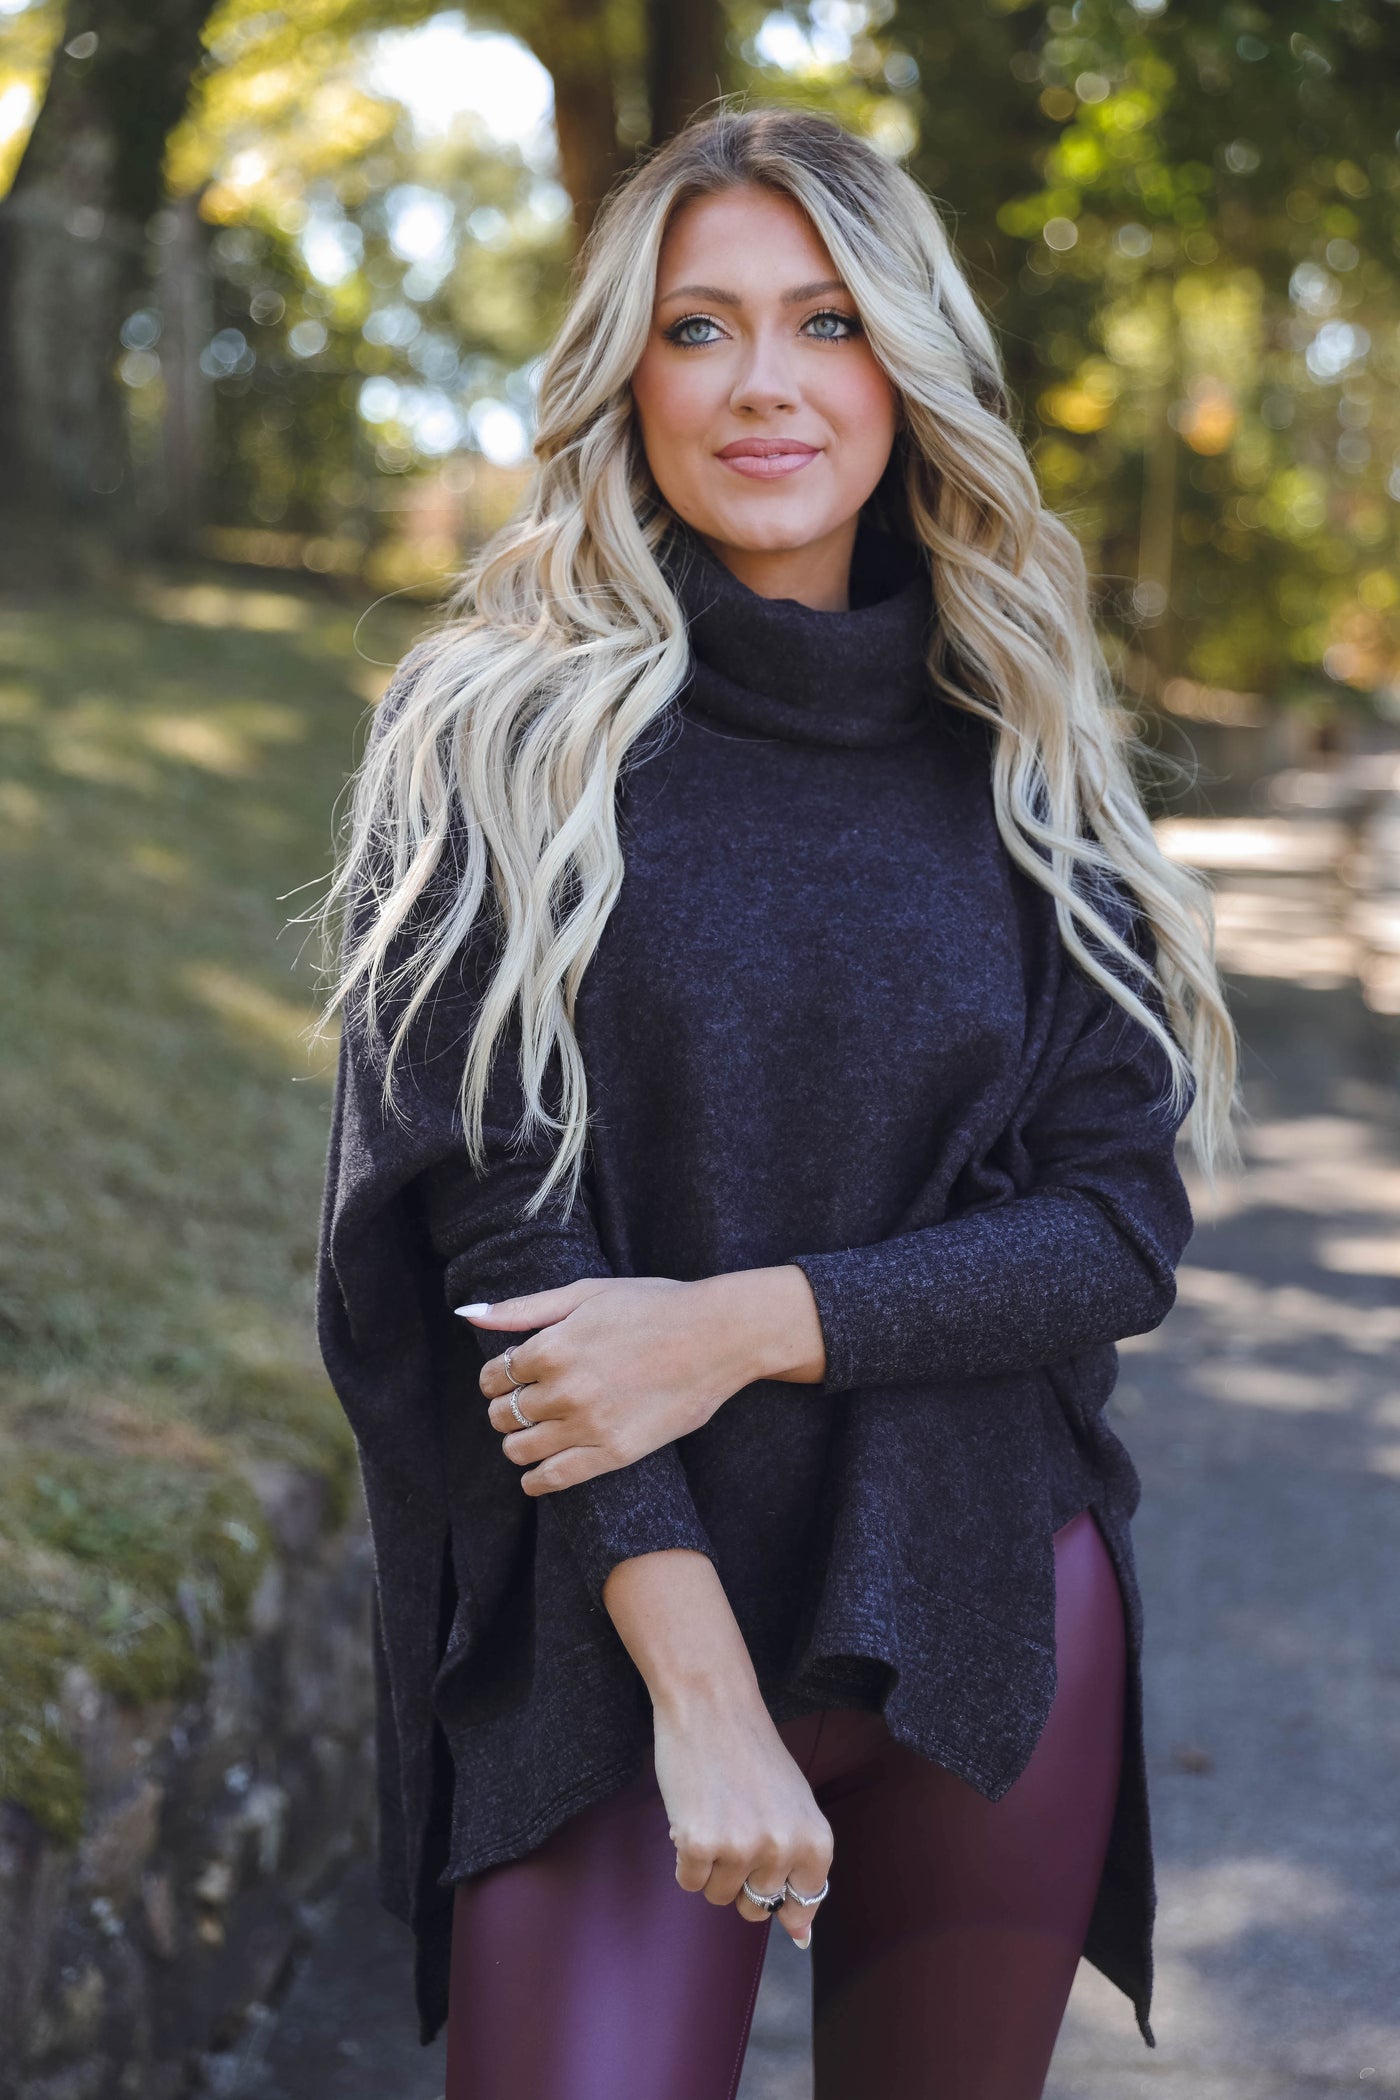 Comfy Charcoal Grey Cowl Neck Sweater- Cute Oversized Sweater- Cherish Cowl Neck Sweater